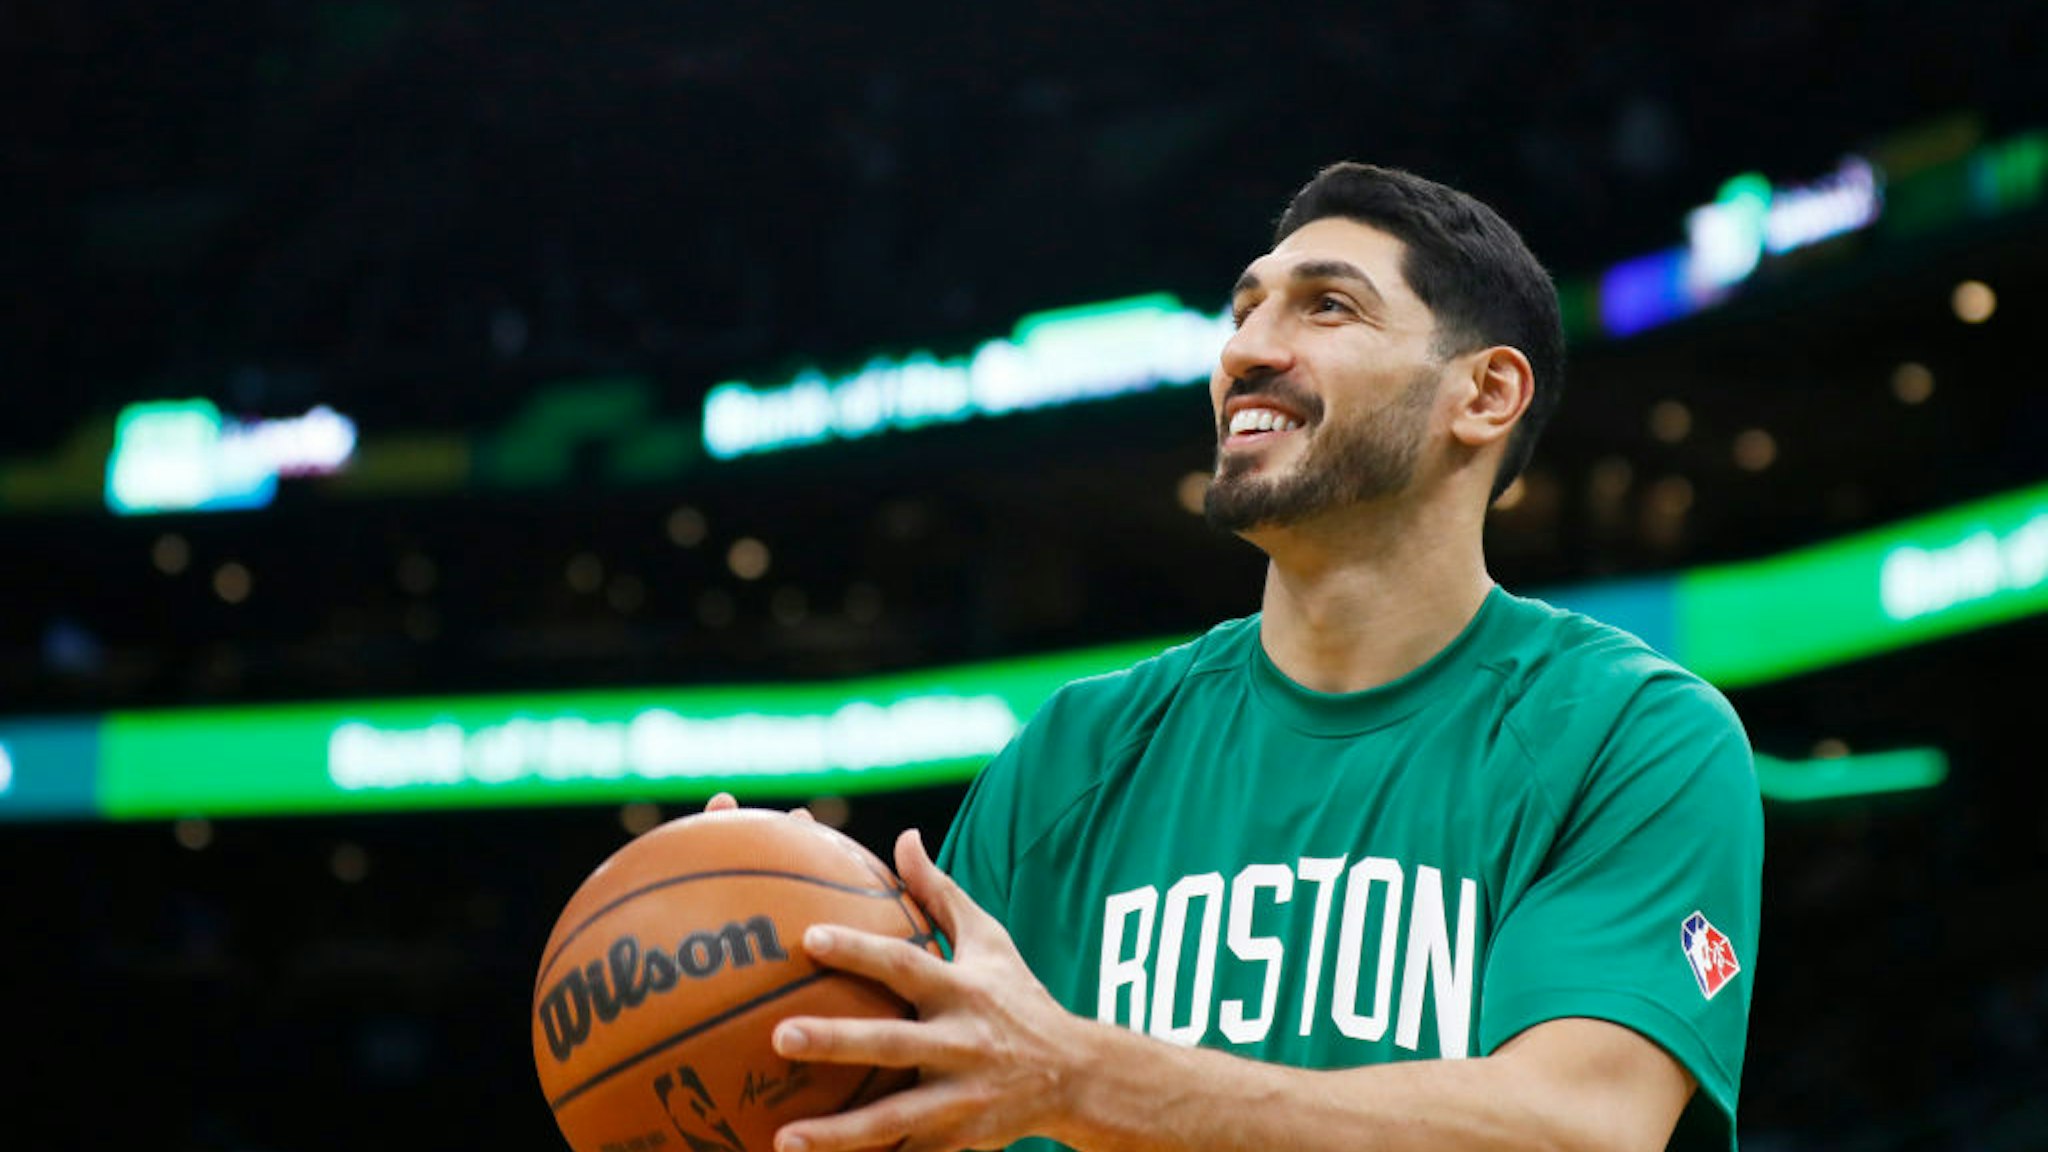 Enes Kanter #13 of the Boston Celtics reacts before the game against the Washington Wizards at TD Garden on October 27, 2021 in Boston, Massachusetts.